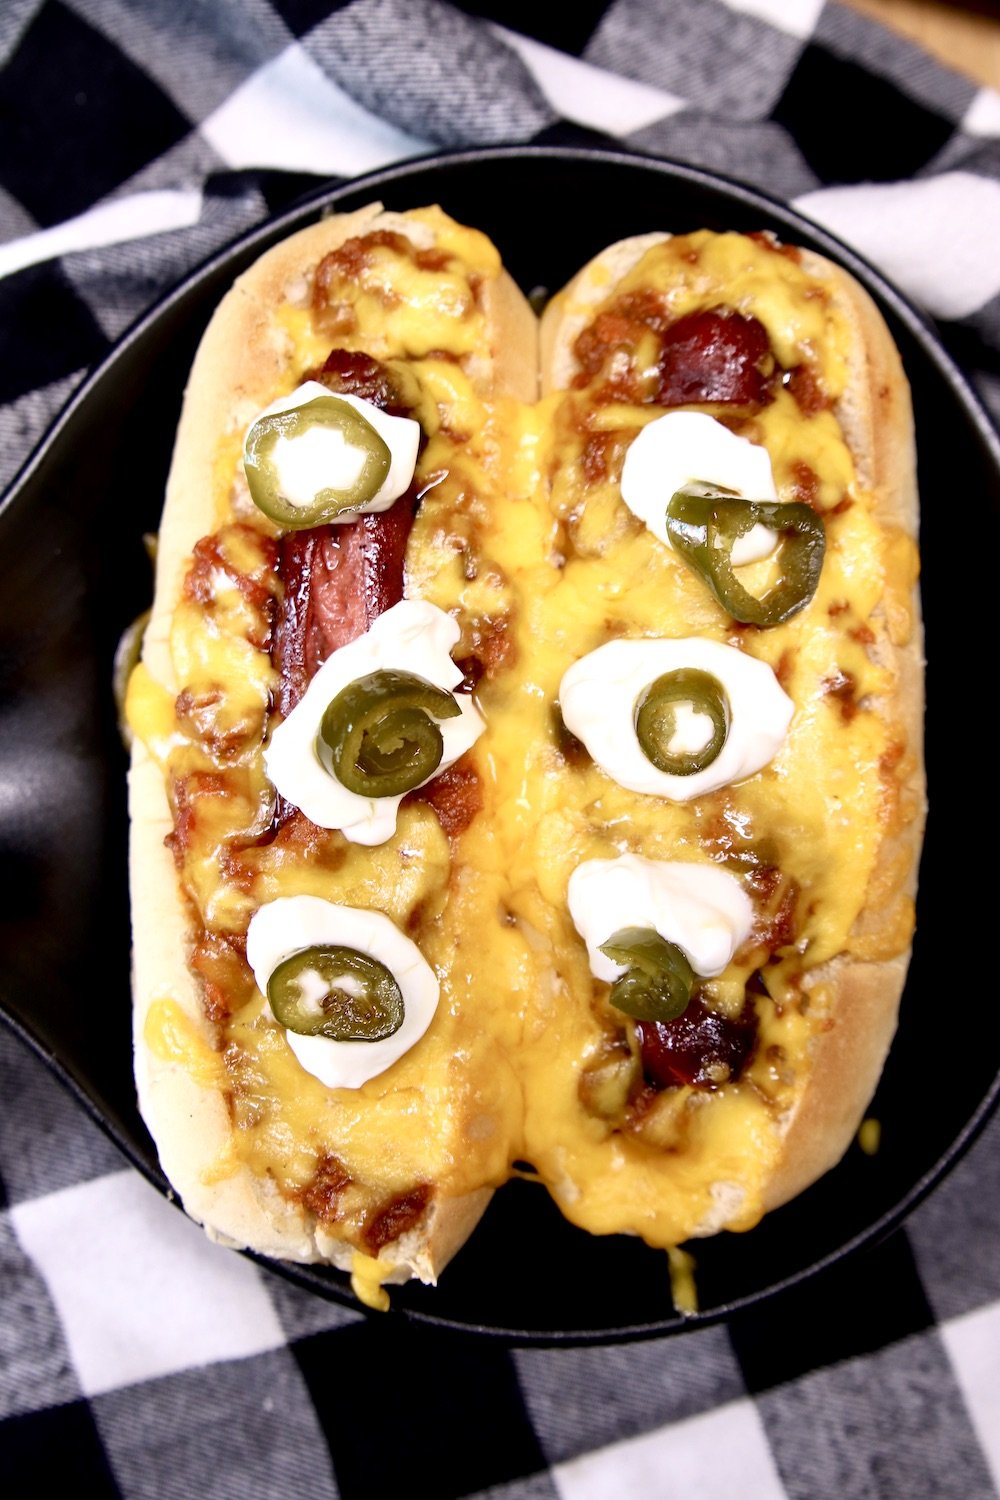 2 chili dogs with sour cream dollops and jalapenos